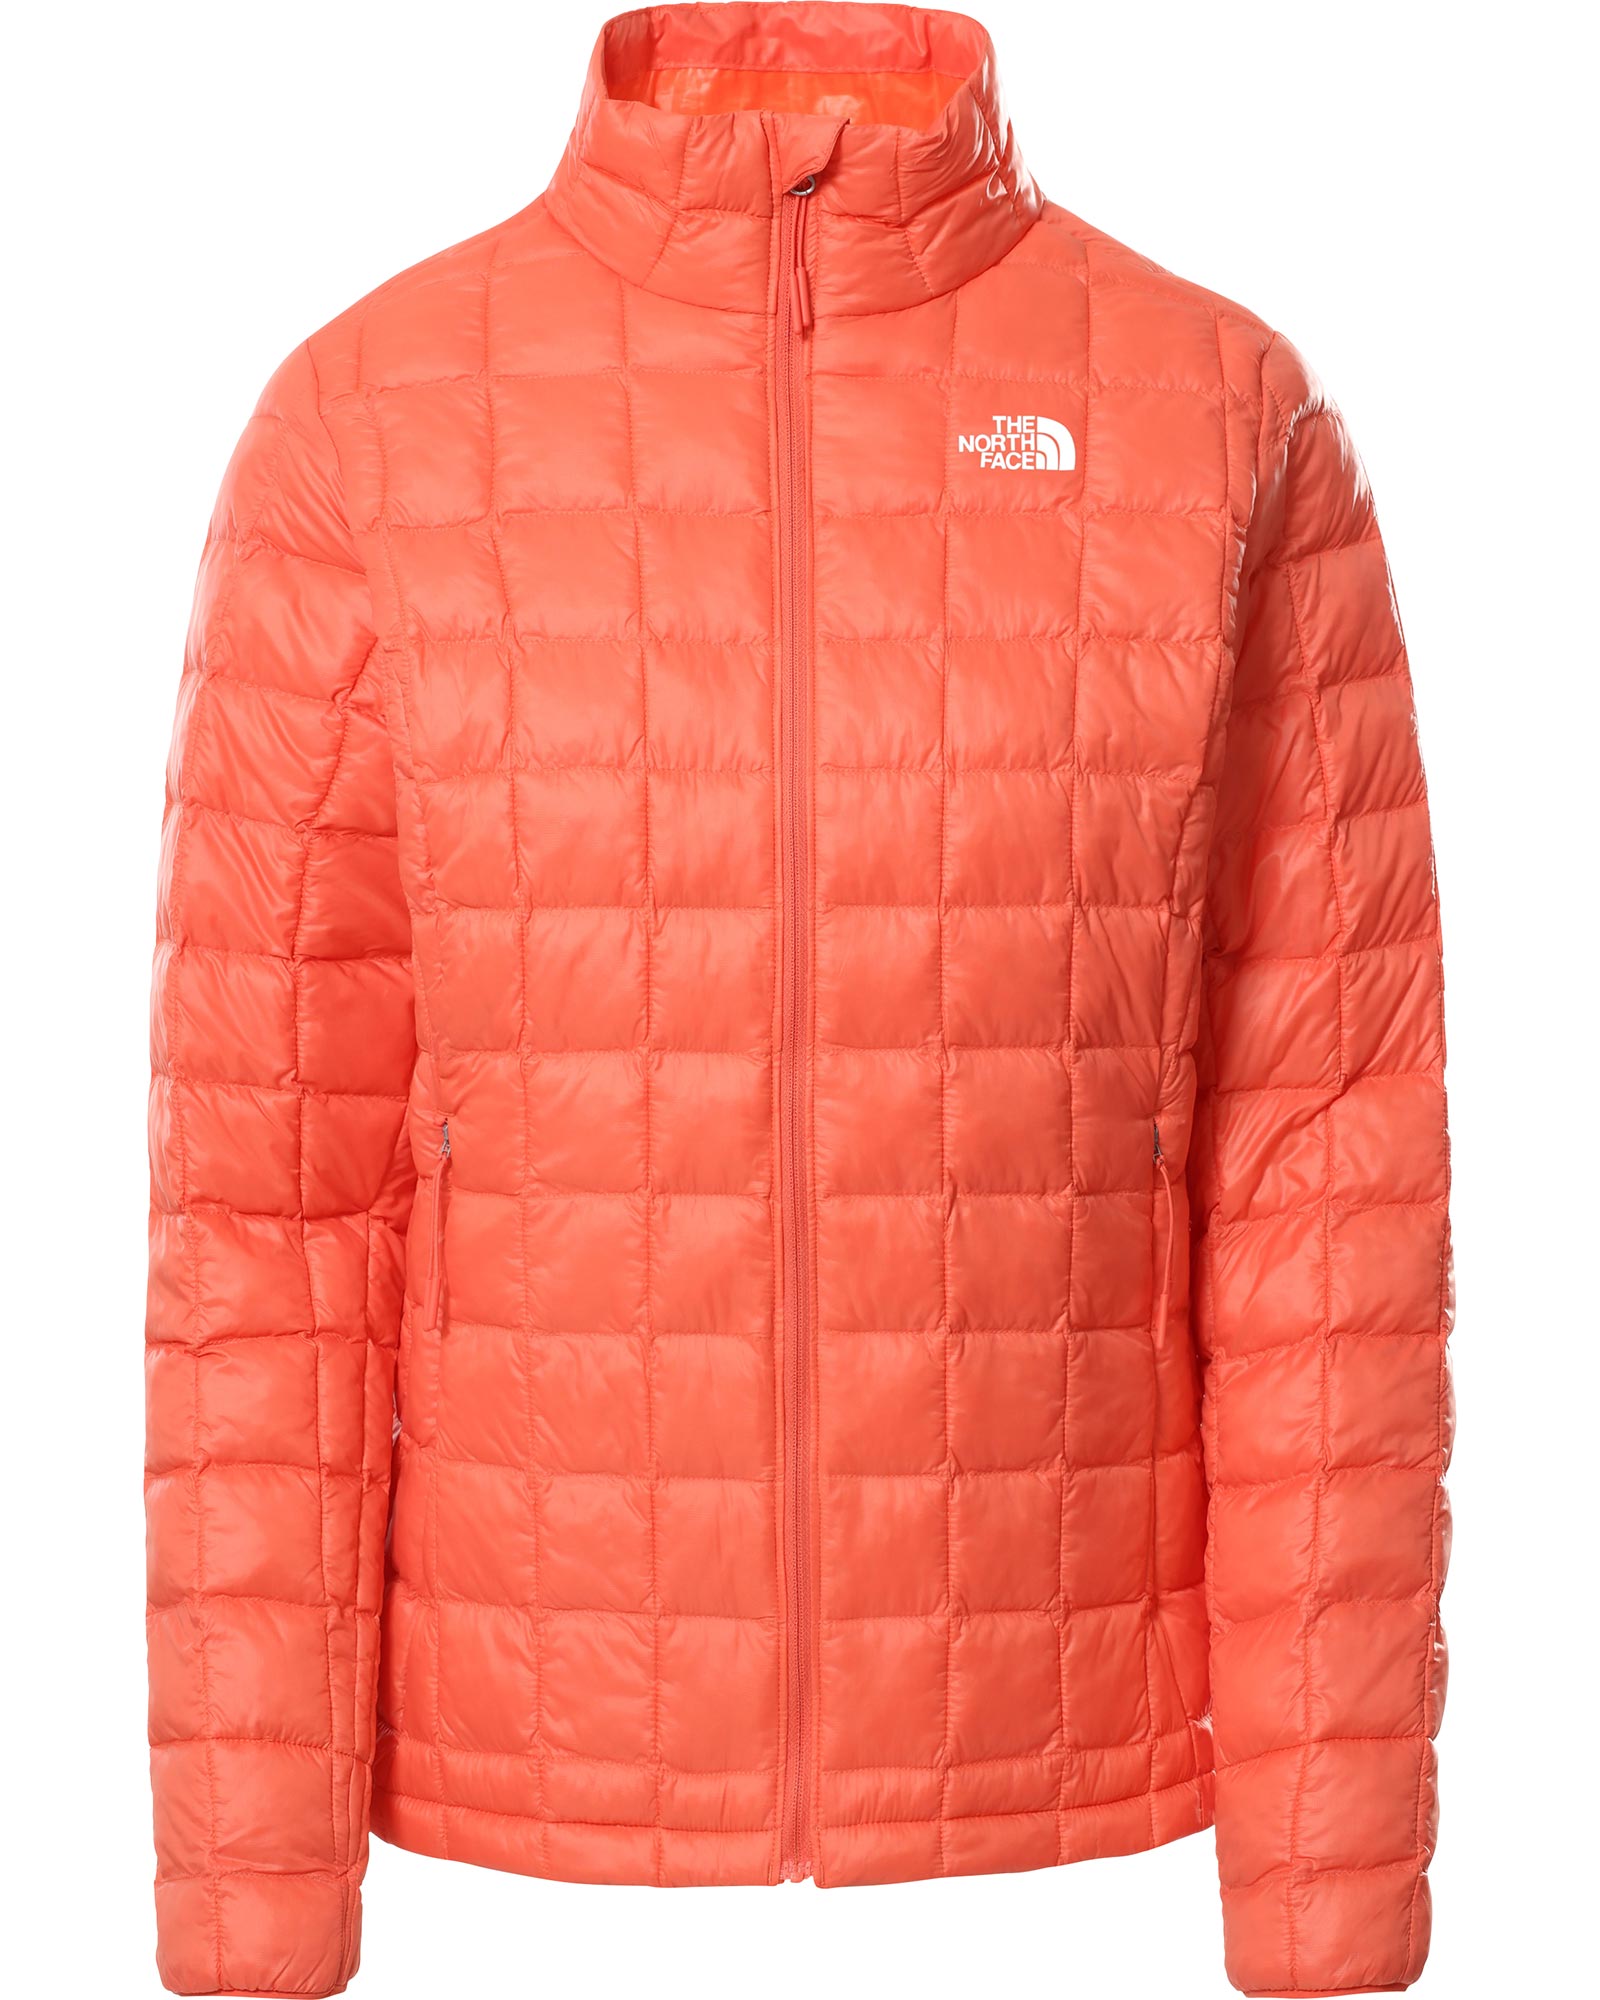 The North Face ThermoBall Eco Women’s Jacket - Emberglow Orange S